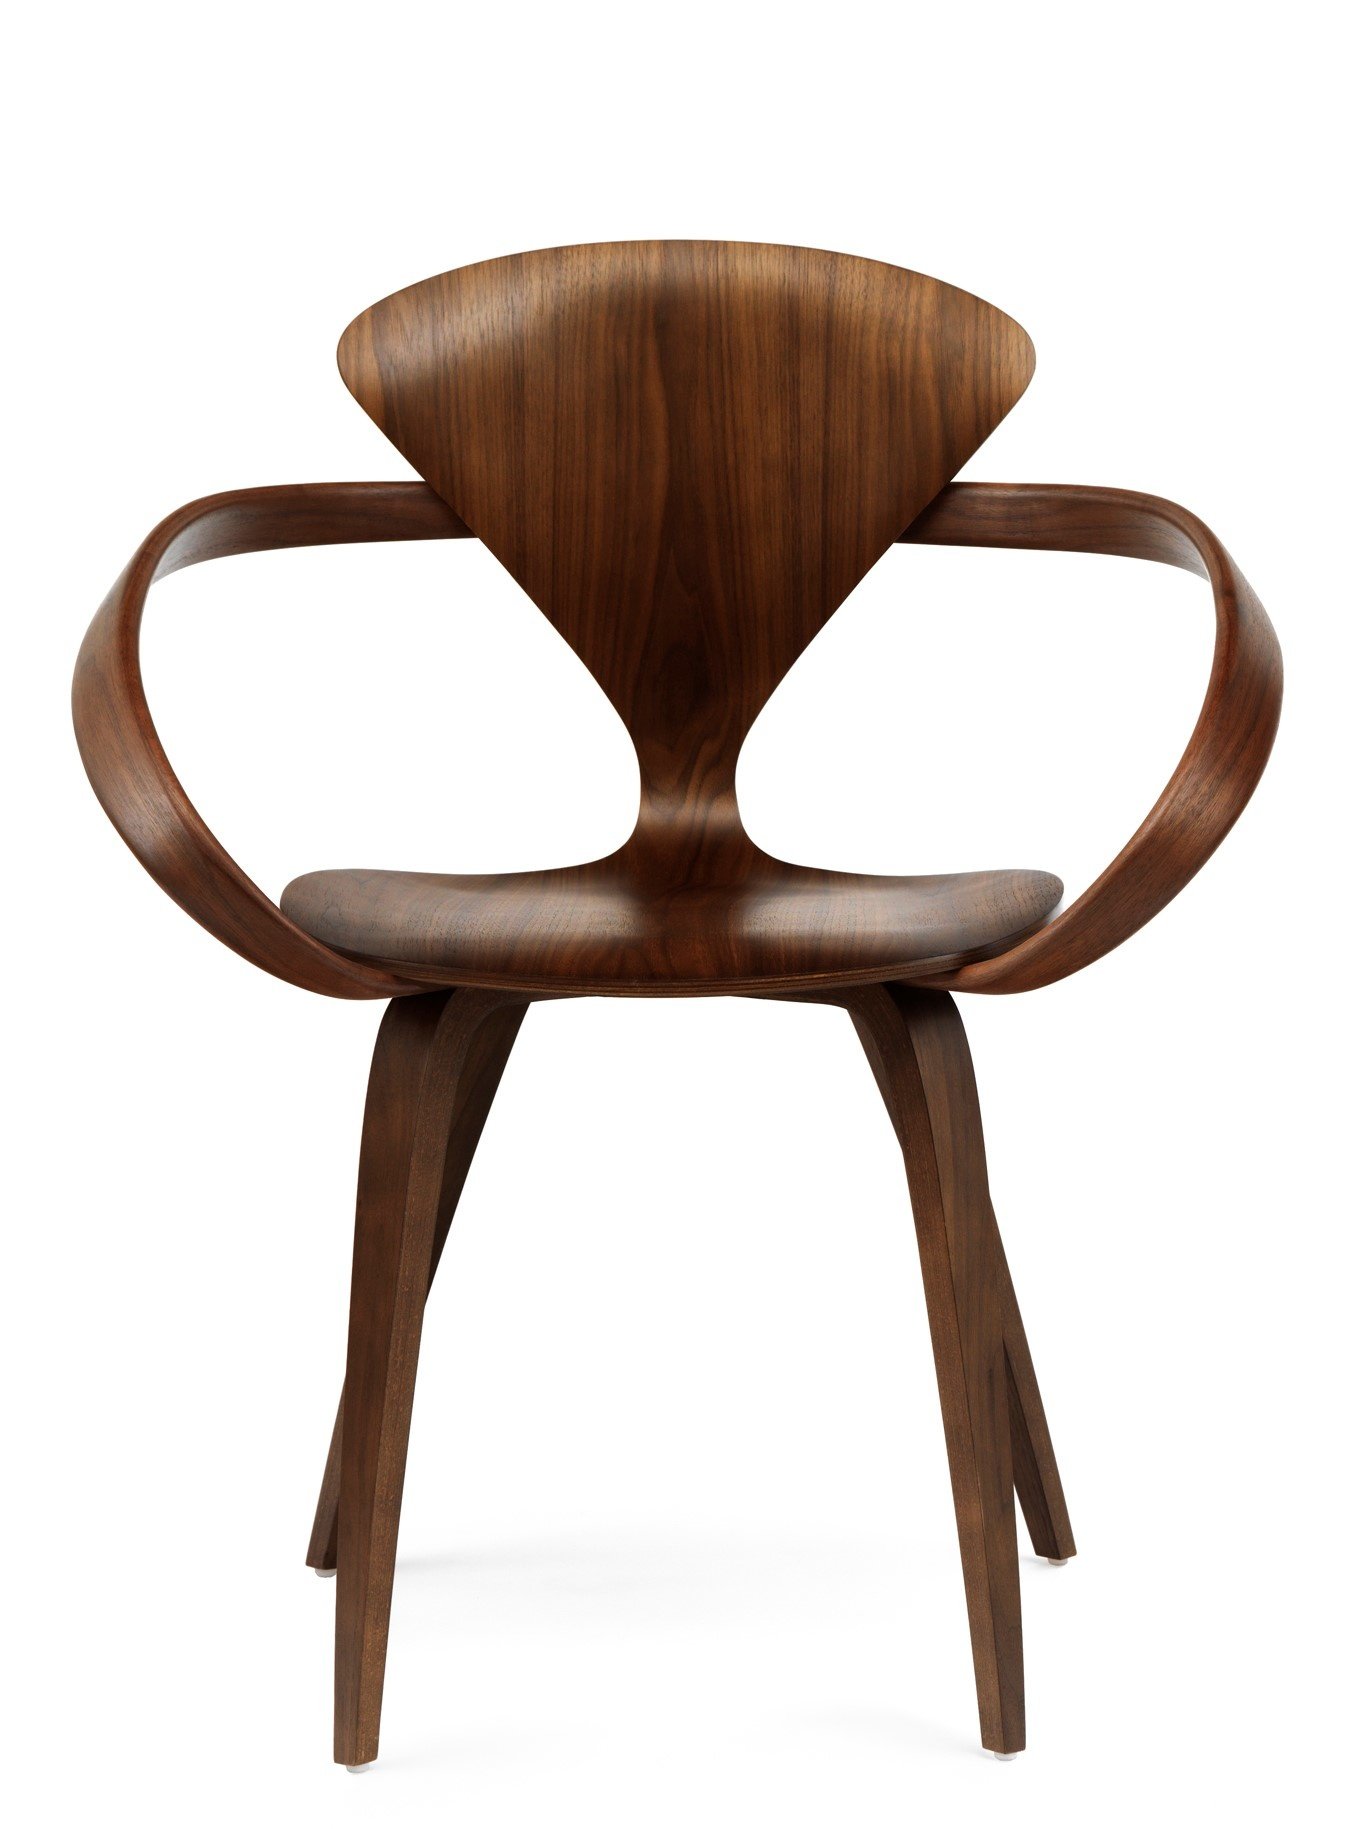 Armchair by Norman Cherner